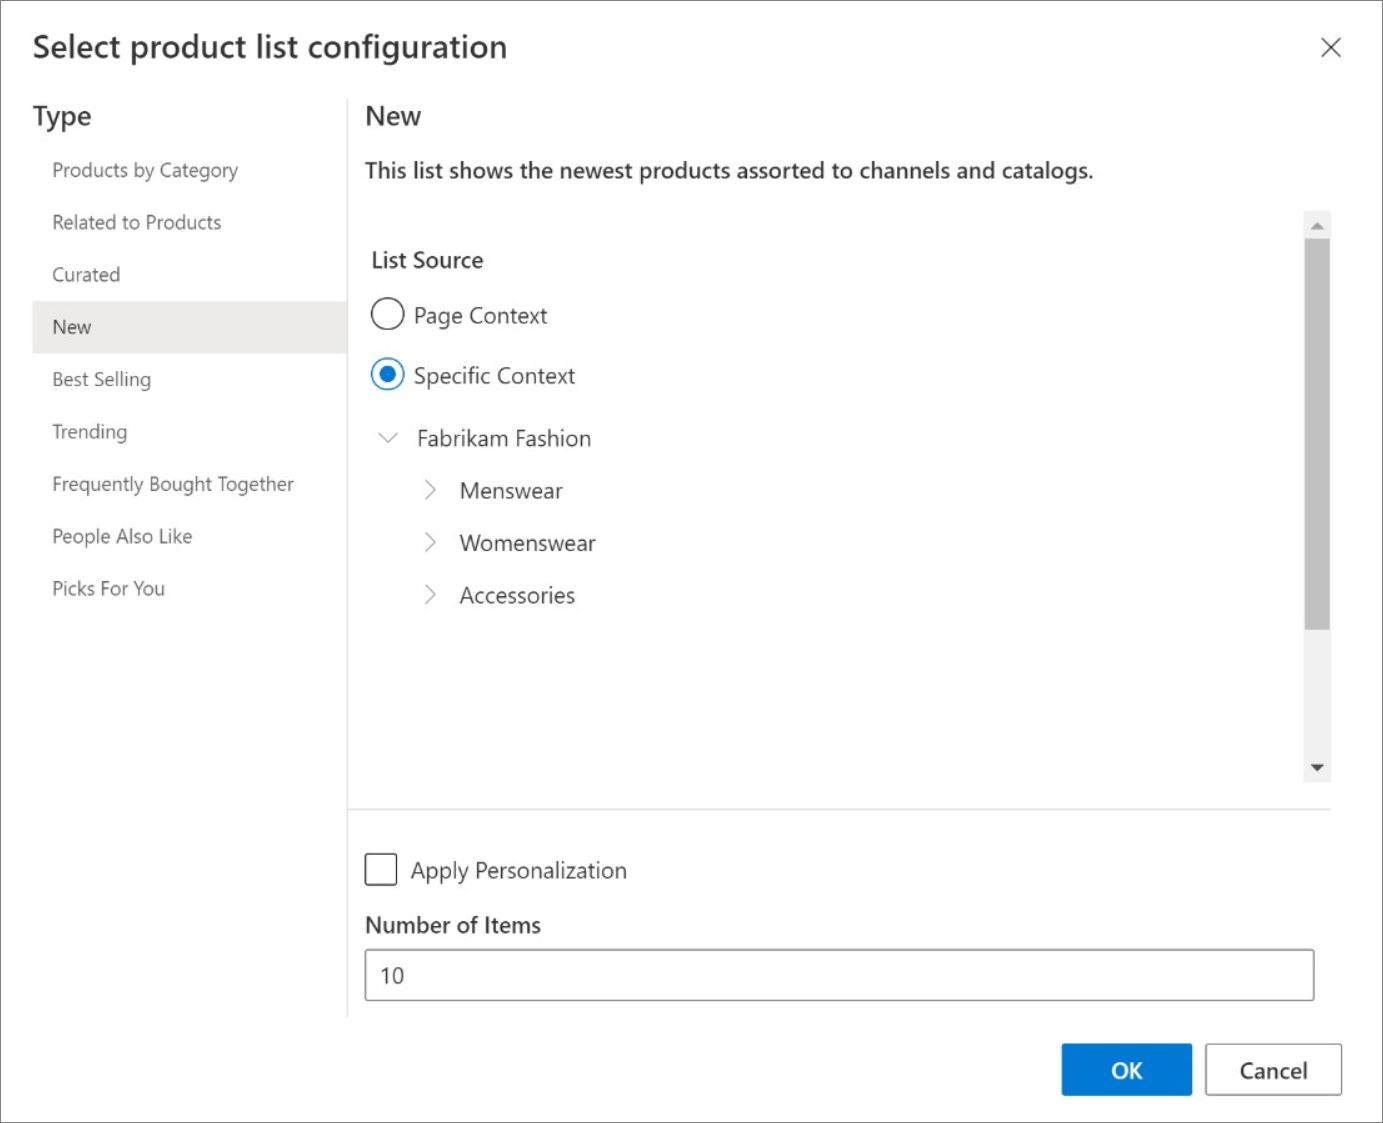 Screenshot of the Dynamics 365 Commerce Select product list configuration page.